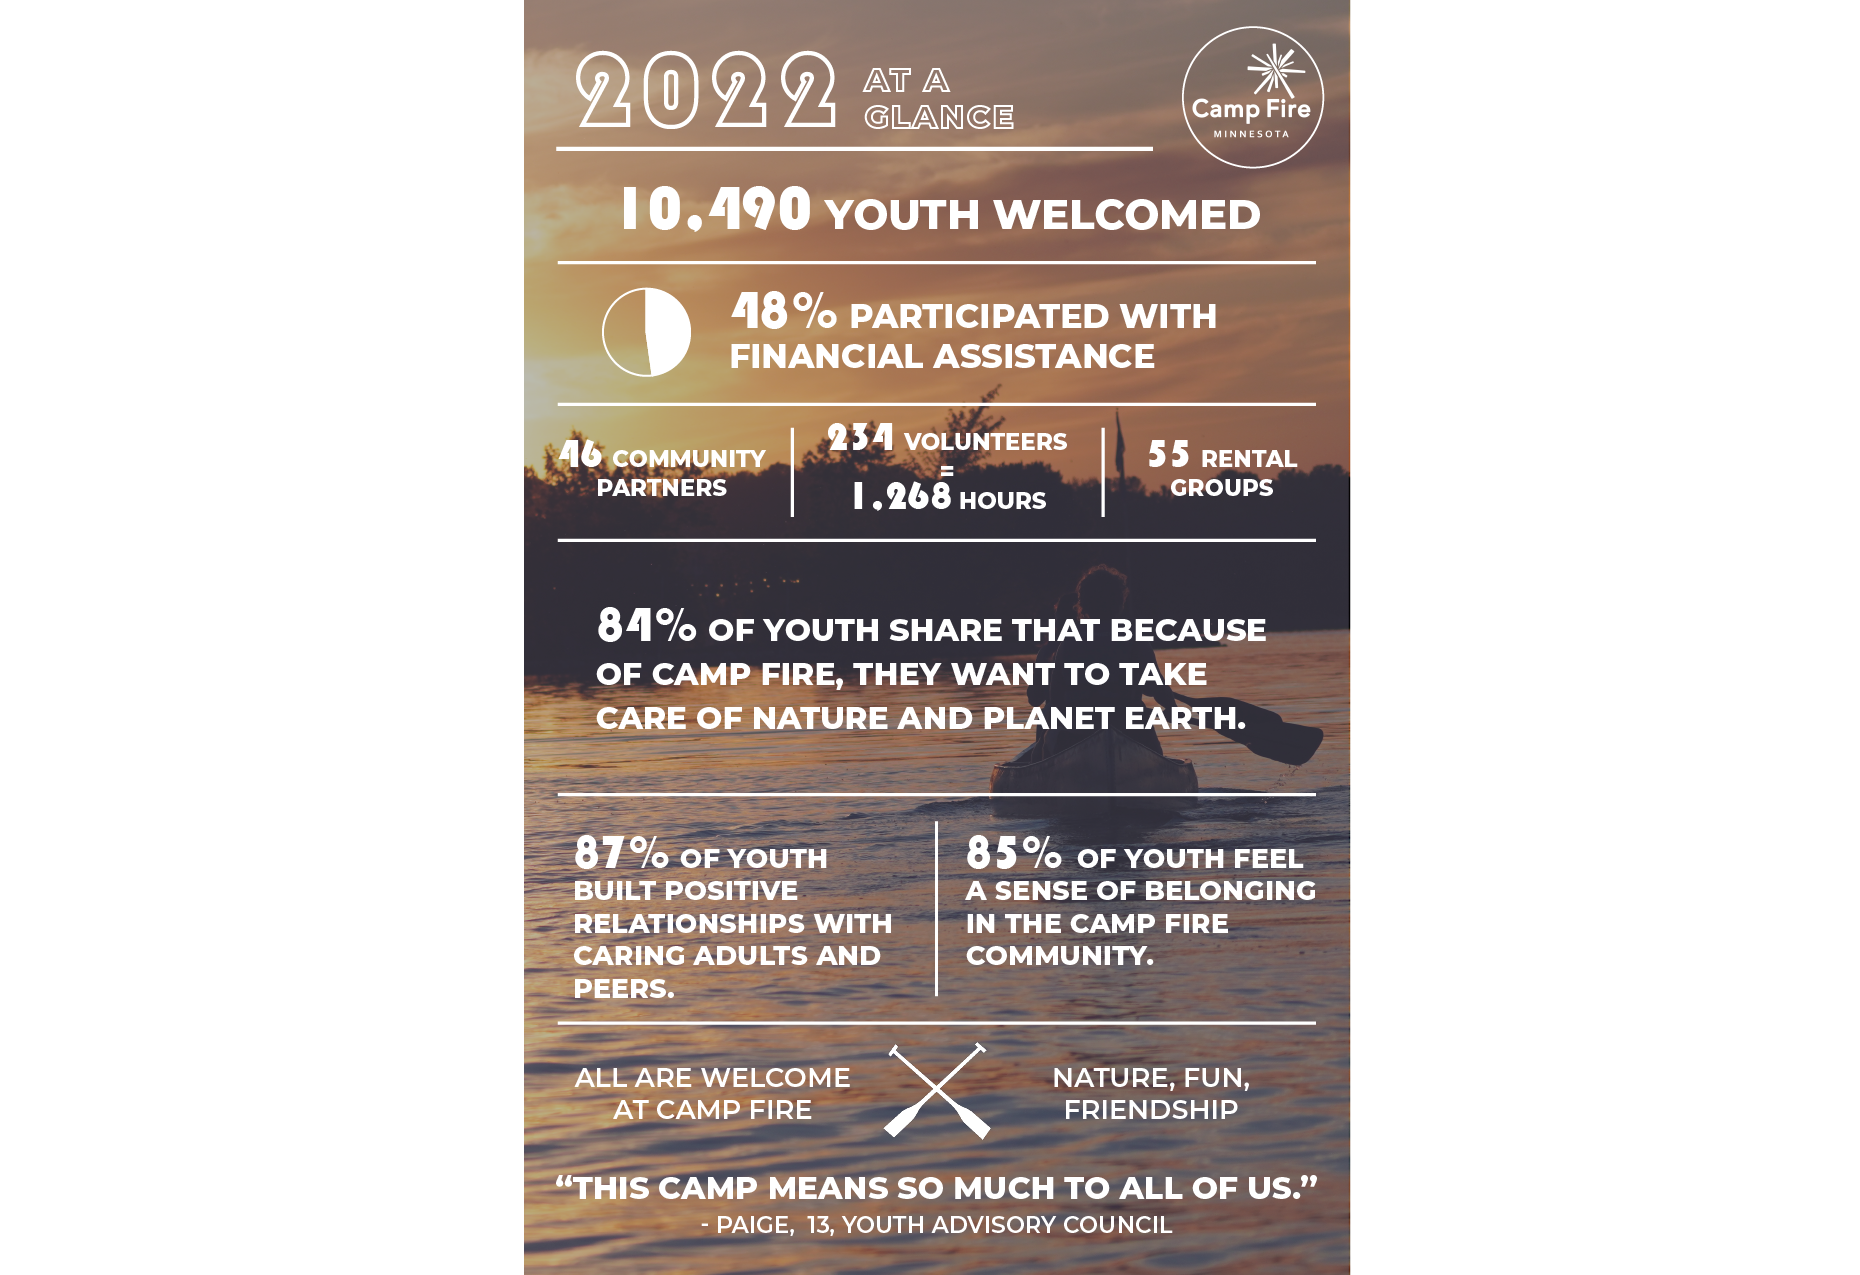 2022 at a glance: 10,490 youth welcomed 48% welcomed through financial assistance 46 Community Partners 55 Rentals 234 People = 1268 Volunteers Hours 87% of youth built positive relationships with caring adults and peers. 84% share because of Camp Fire youth want to take care of nature and planet earth. 85% of youth feel a sense of belonging in the Camp Fire community. This camp means so much to all of us. -Paige, 13, Youth Advisory Council